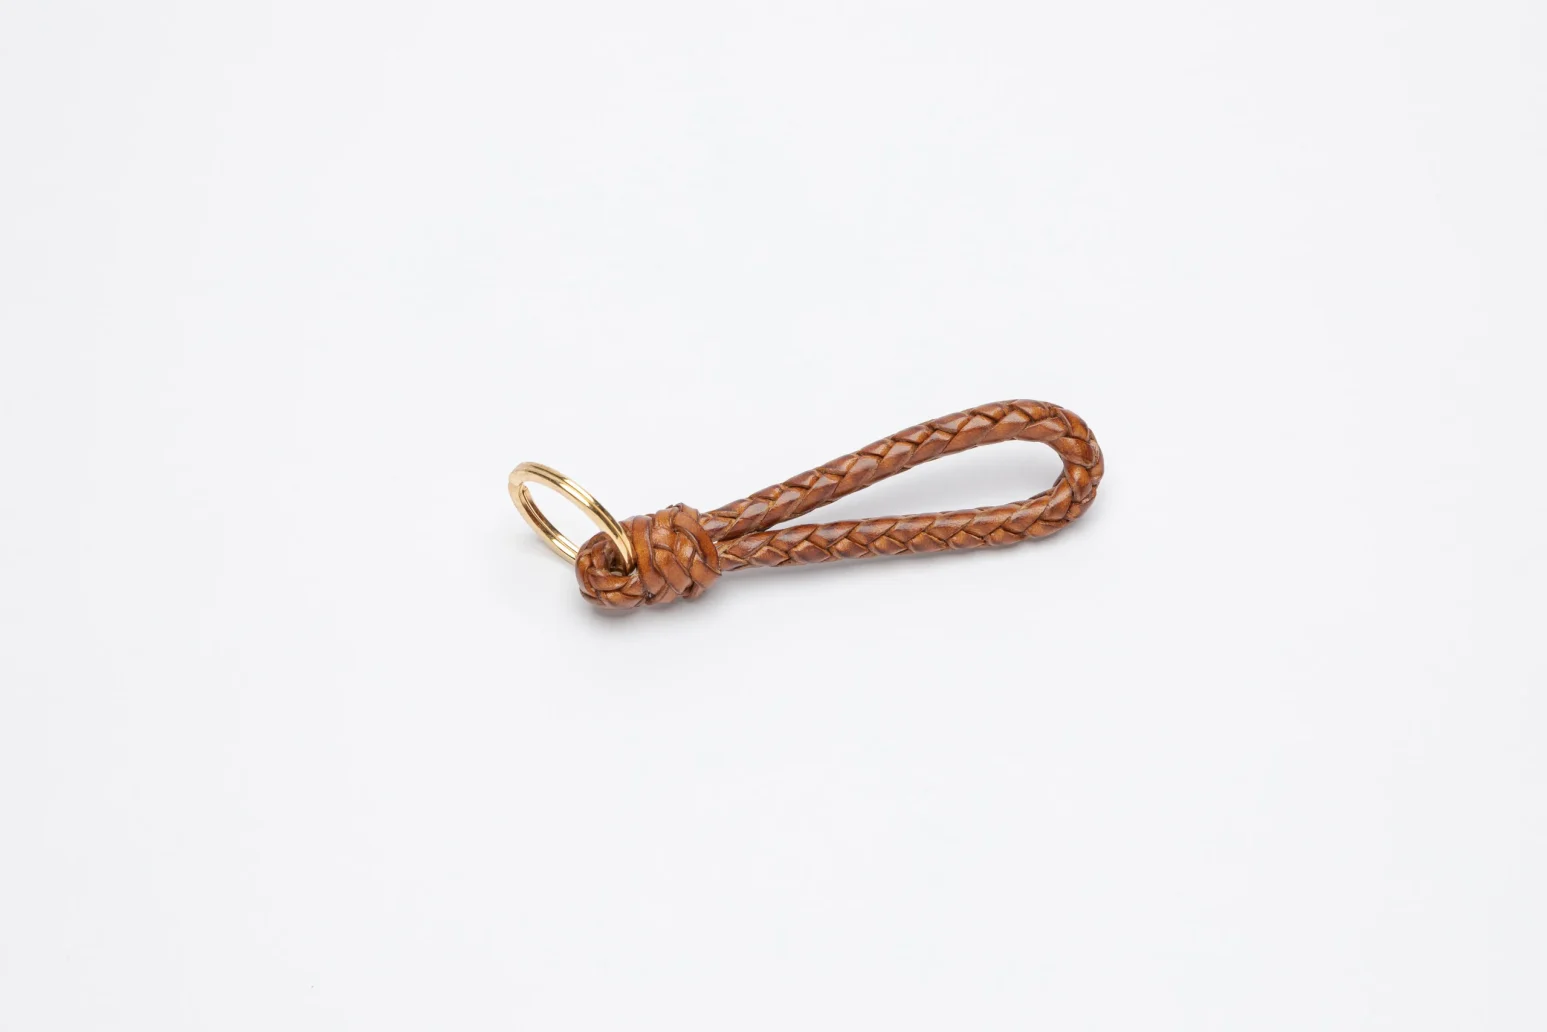 Leather Plaited Key Fob in Bridle Tan